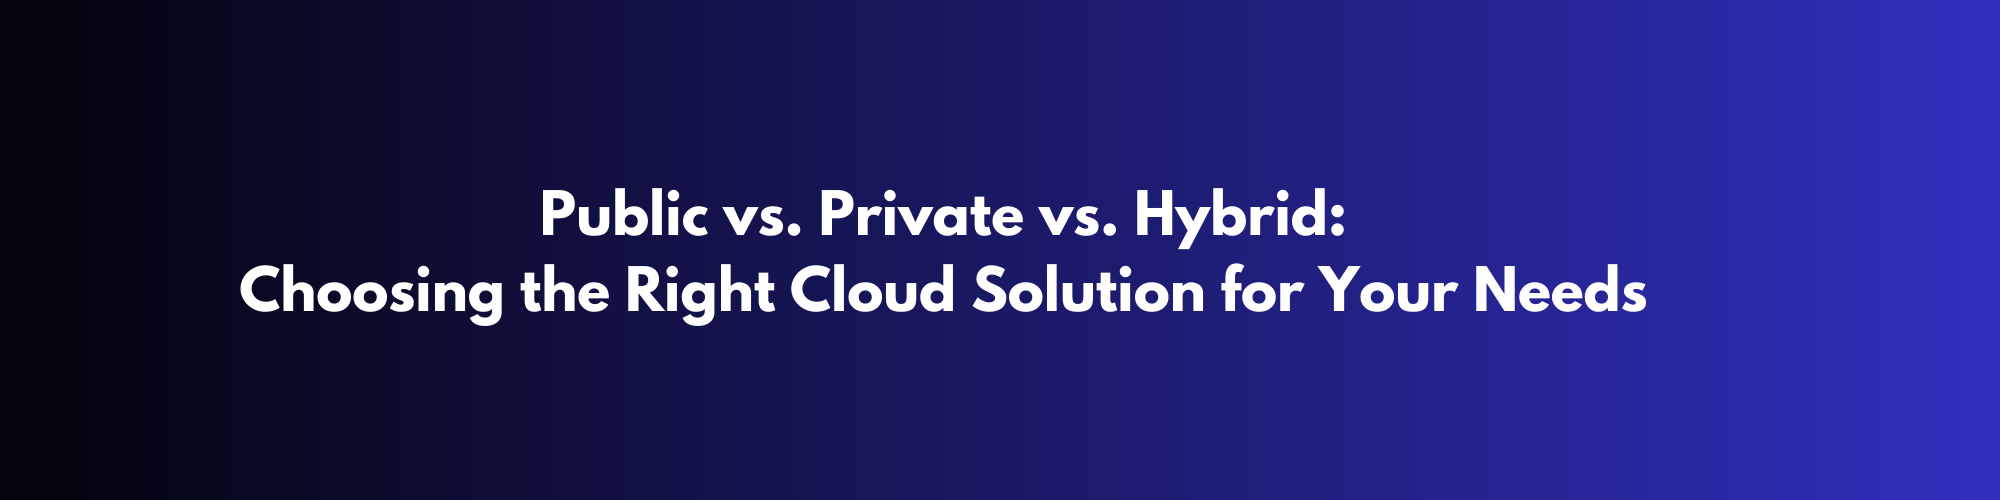  Public vs. Private vs. Hybrid: Choosing the Right Cloud Solution for Your Needs